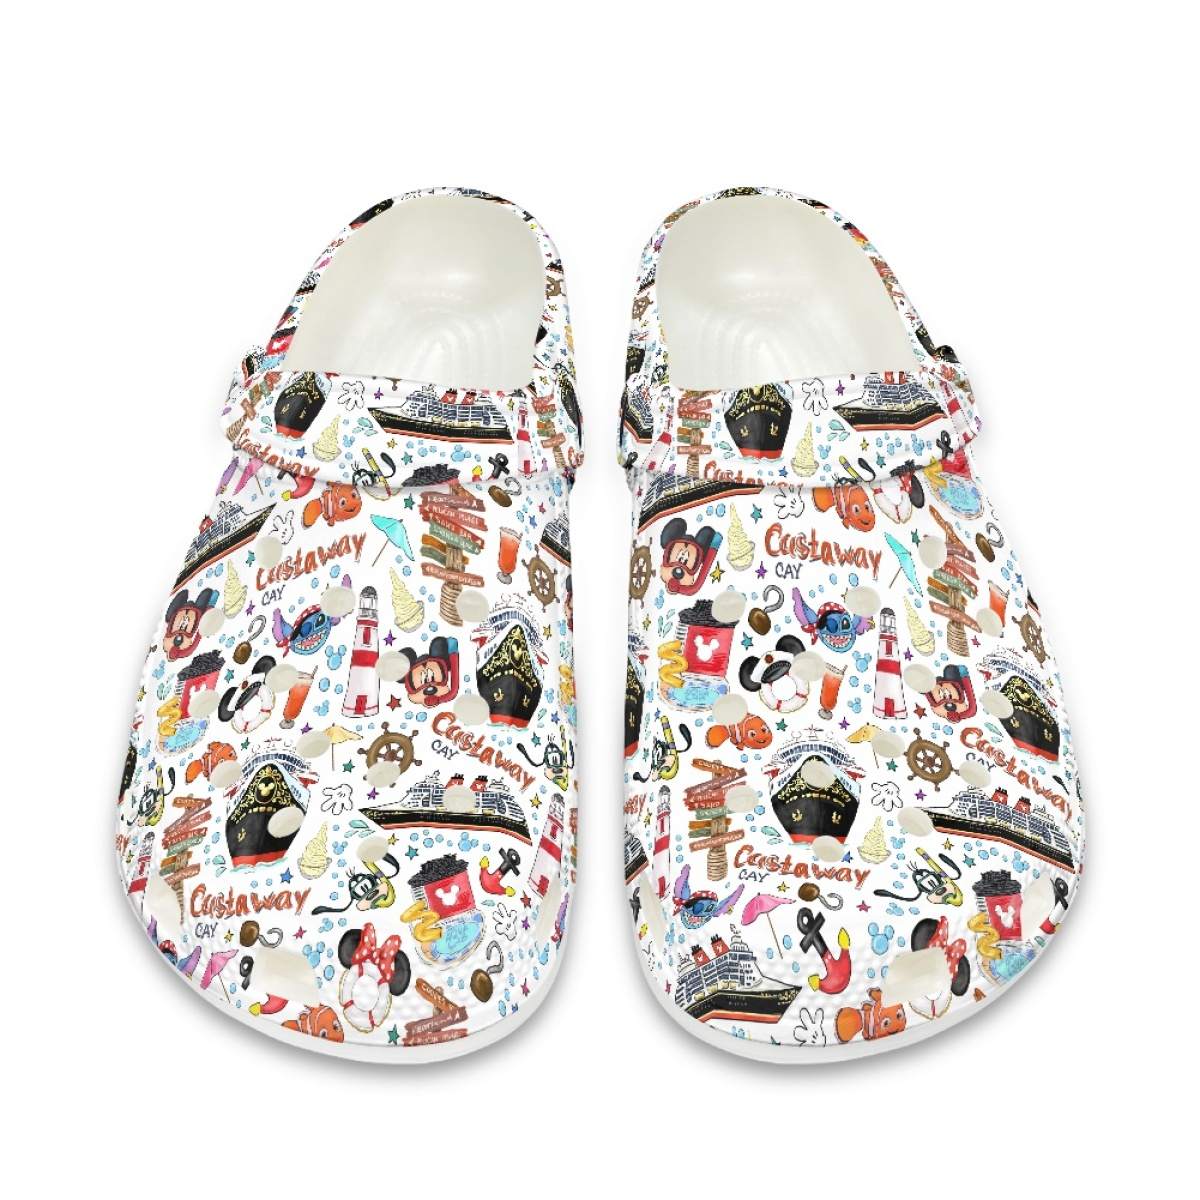 PREORDER White Castaway Cay Women's Shoes